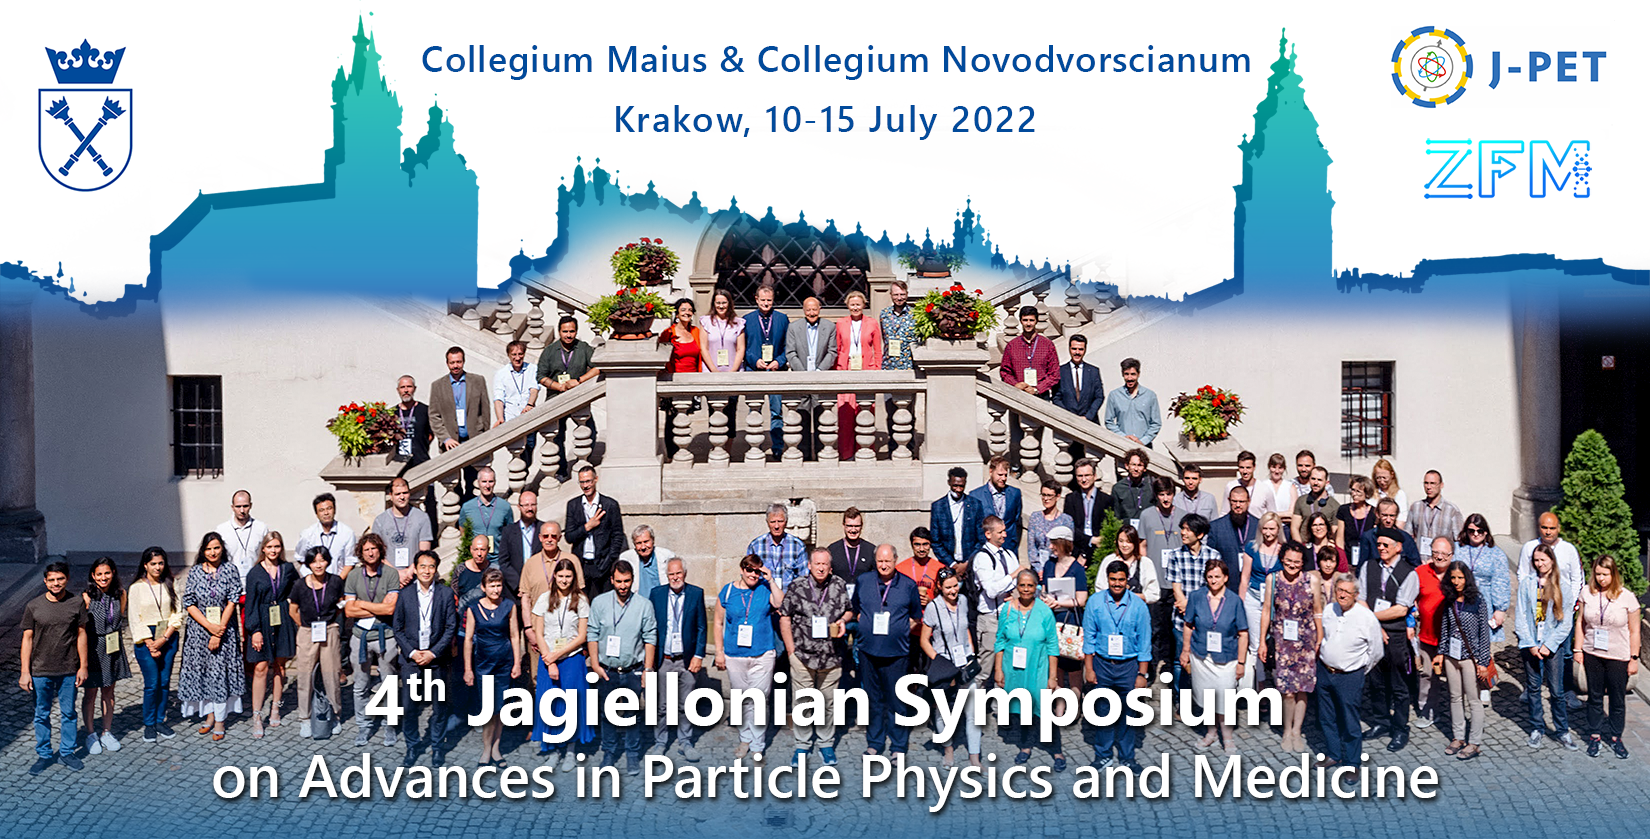 4th Jagiellonian Symposium on Advances in Particle Physics and Medicine